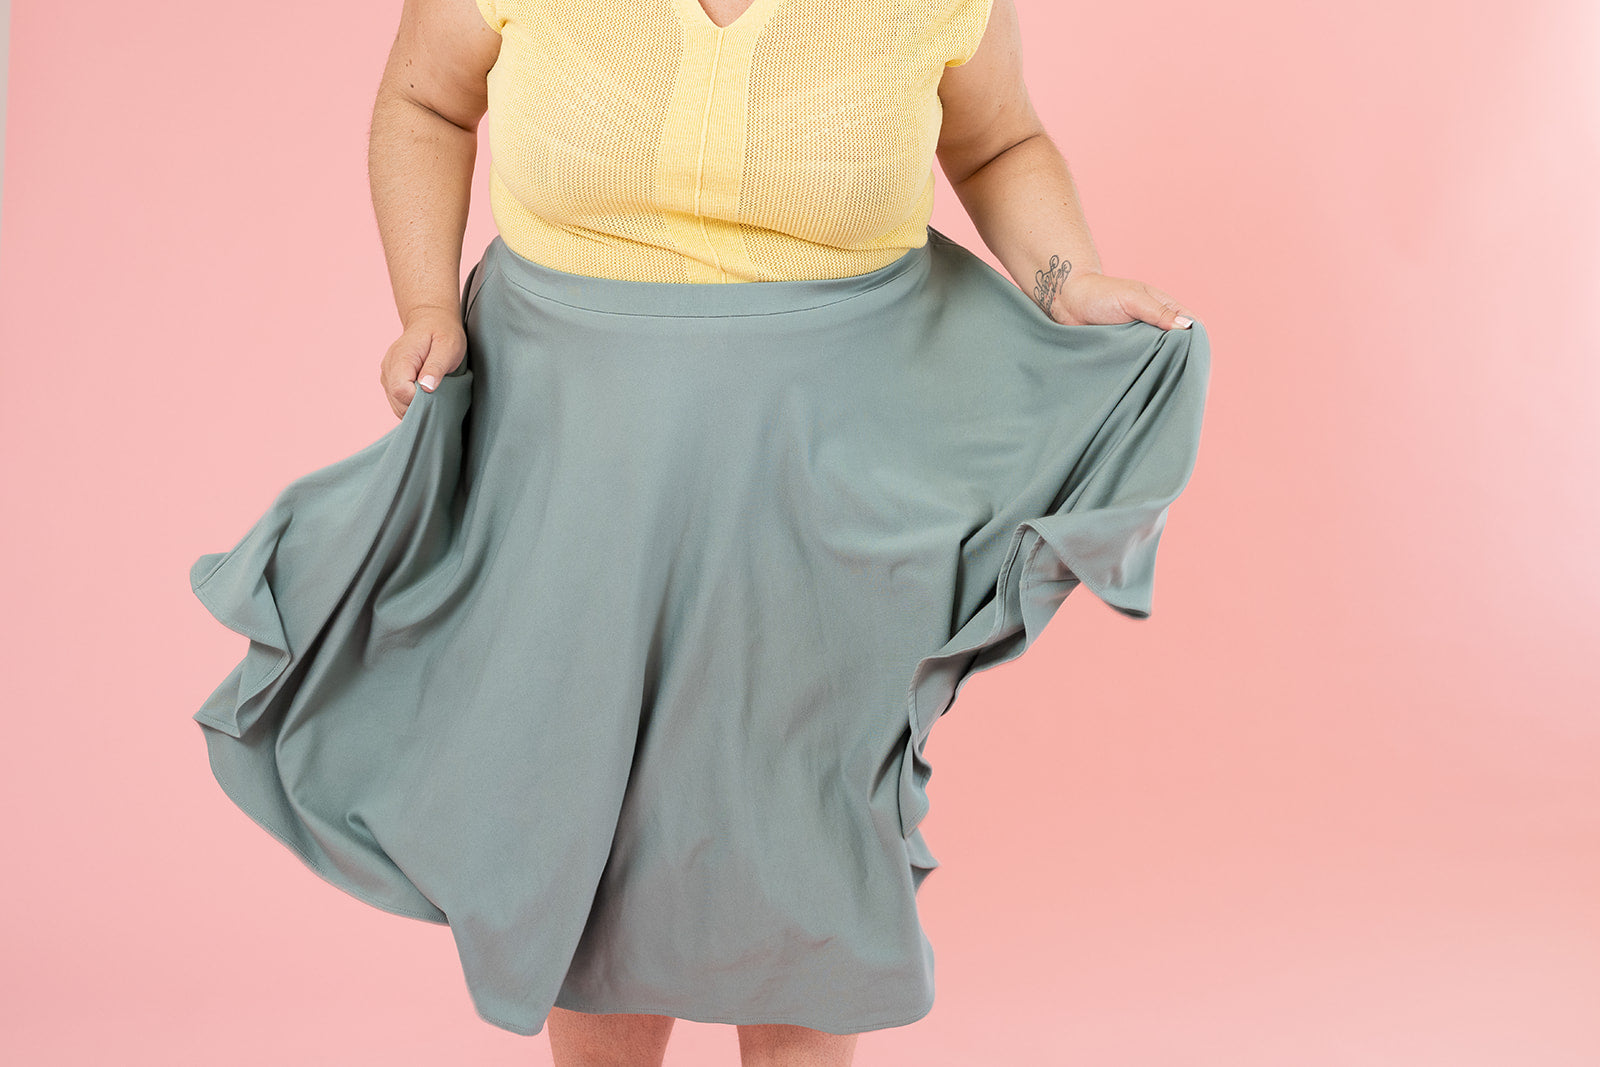 A woman wearing a light yellow top and a light blue skirt is swishing the hem of her skirt to show it off.